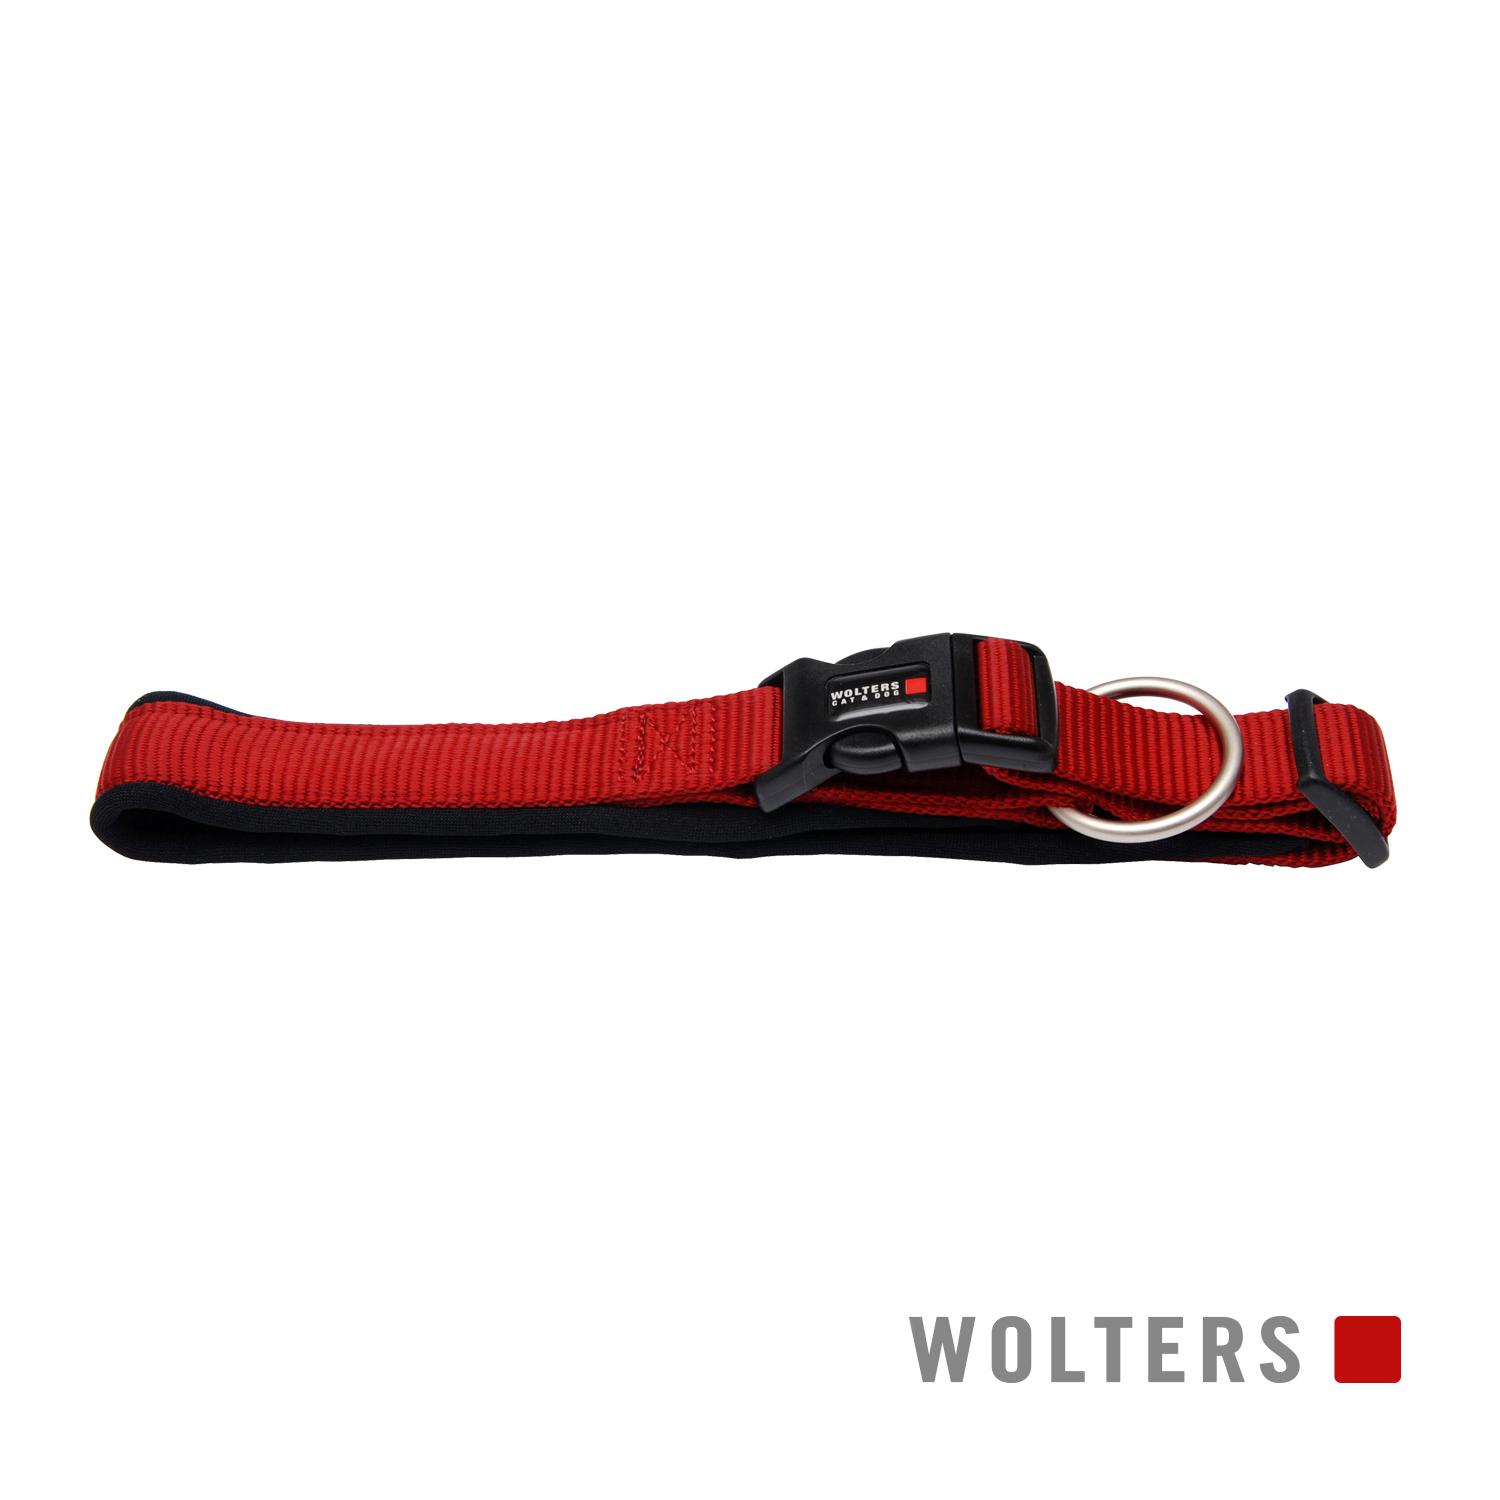 Wolters Halsband Professional Comfort Rot/Schwarz 30-35cm x 25mm